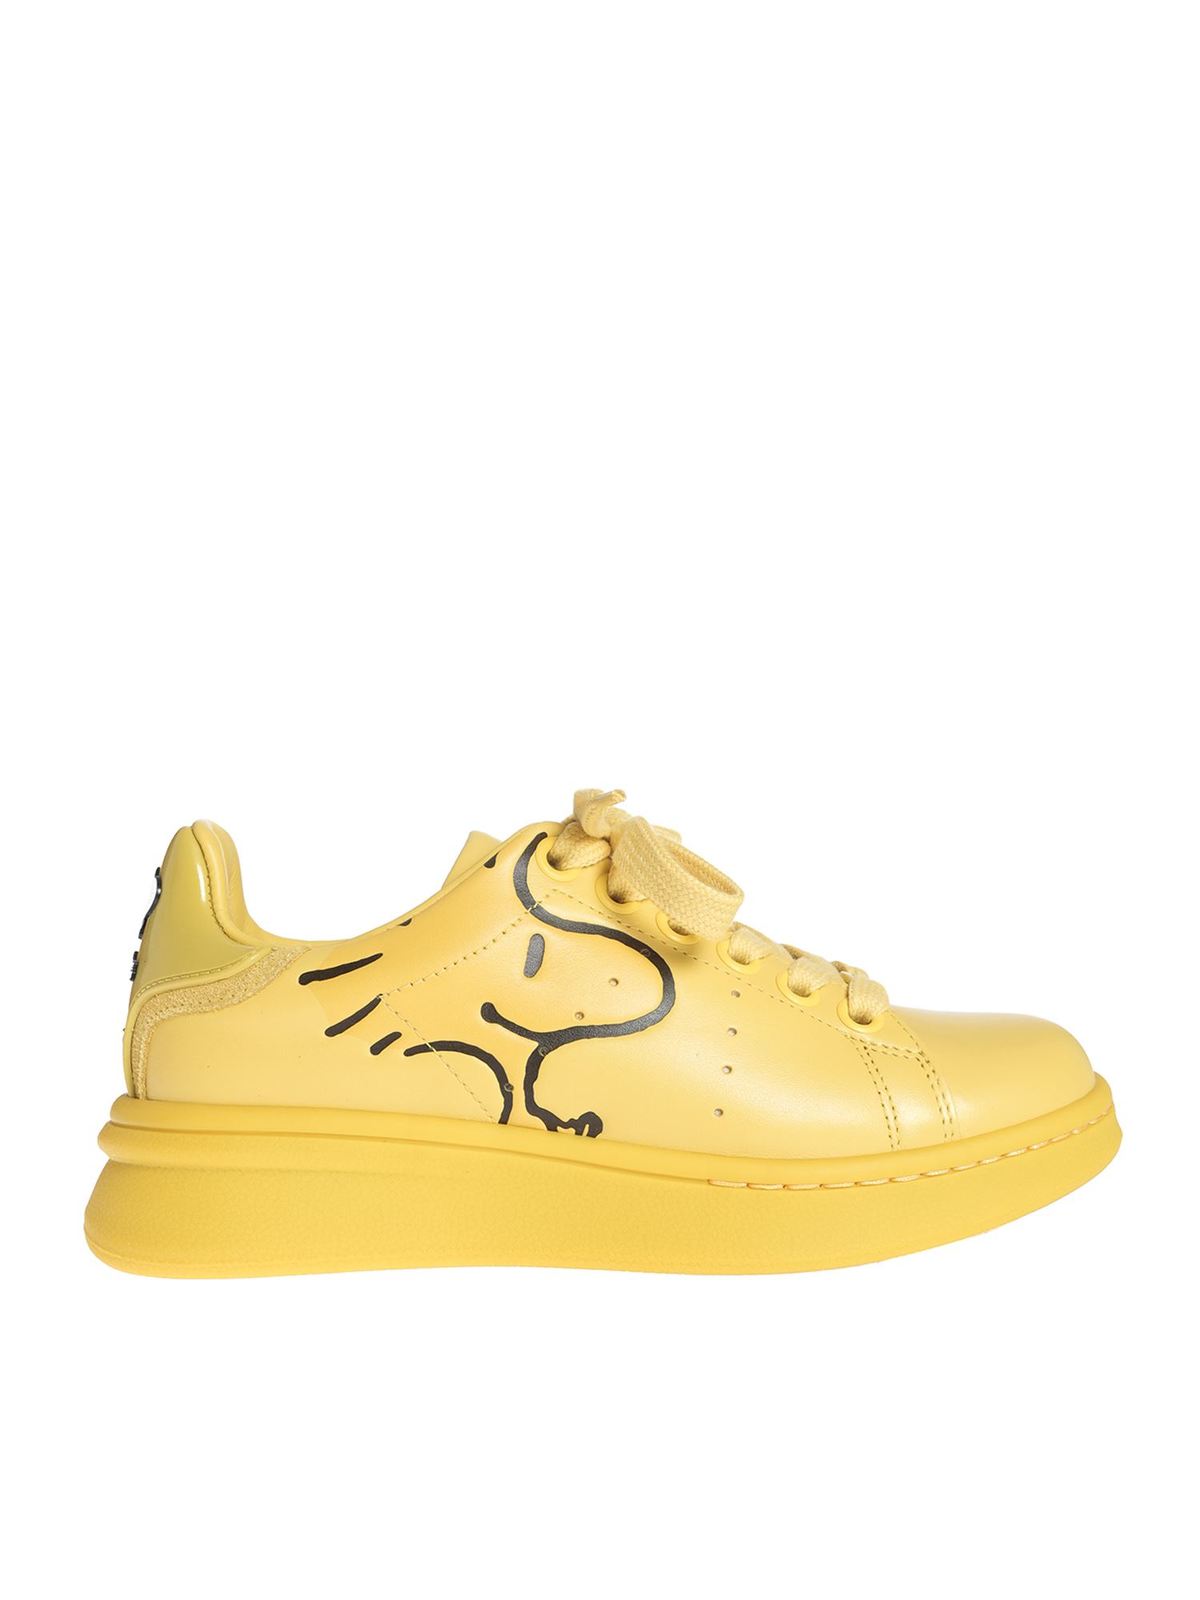 Trainers Marc Jacobs - Peanuts x The Tennis Shoe in yellow - M9002308700